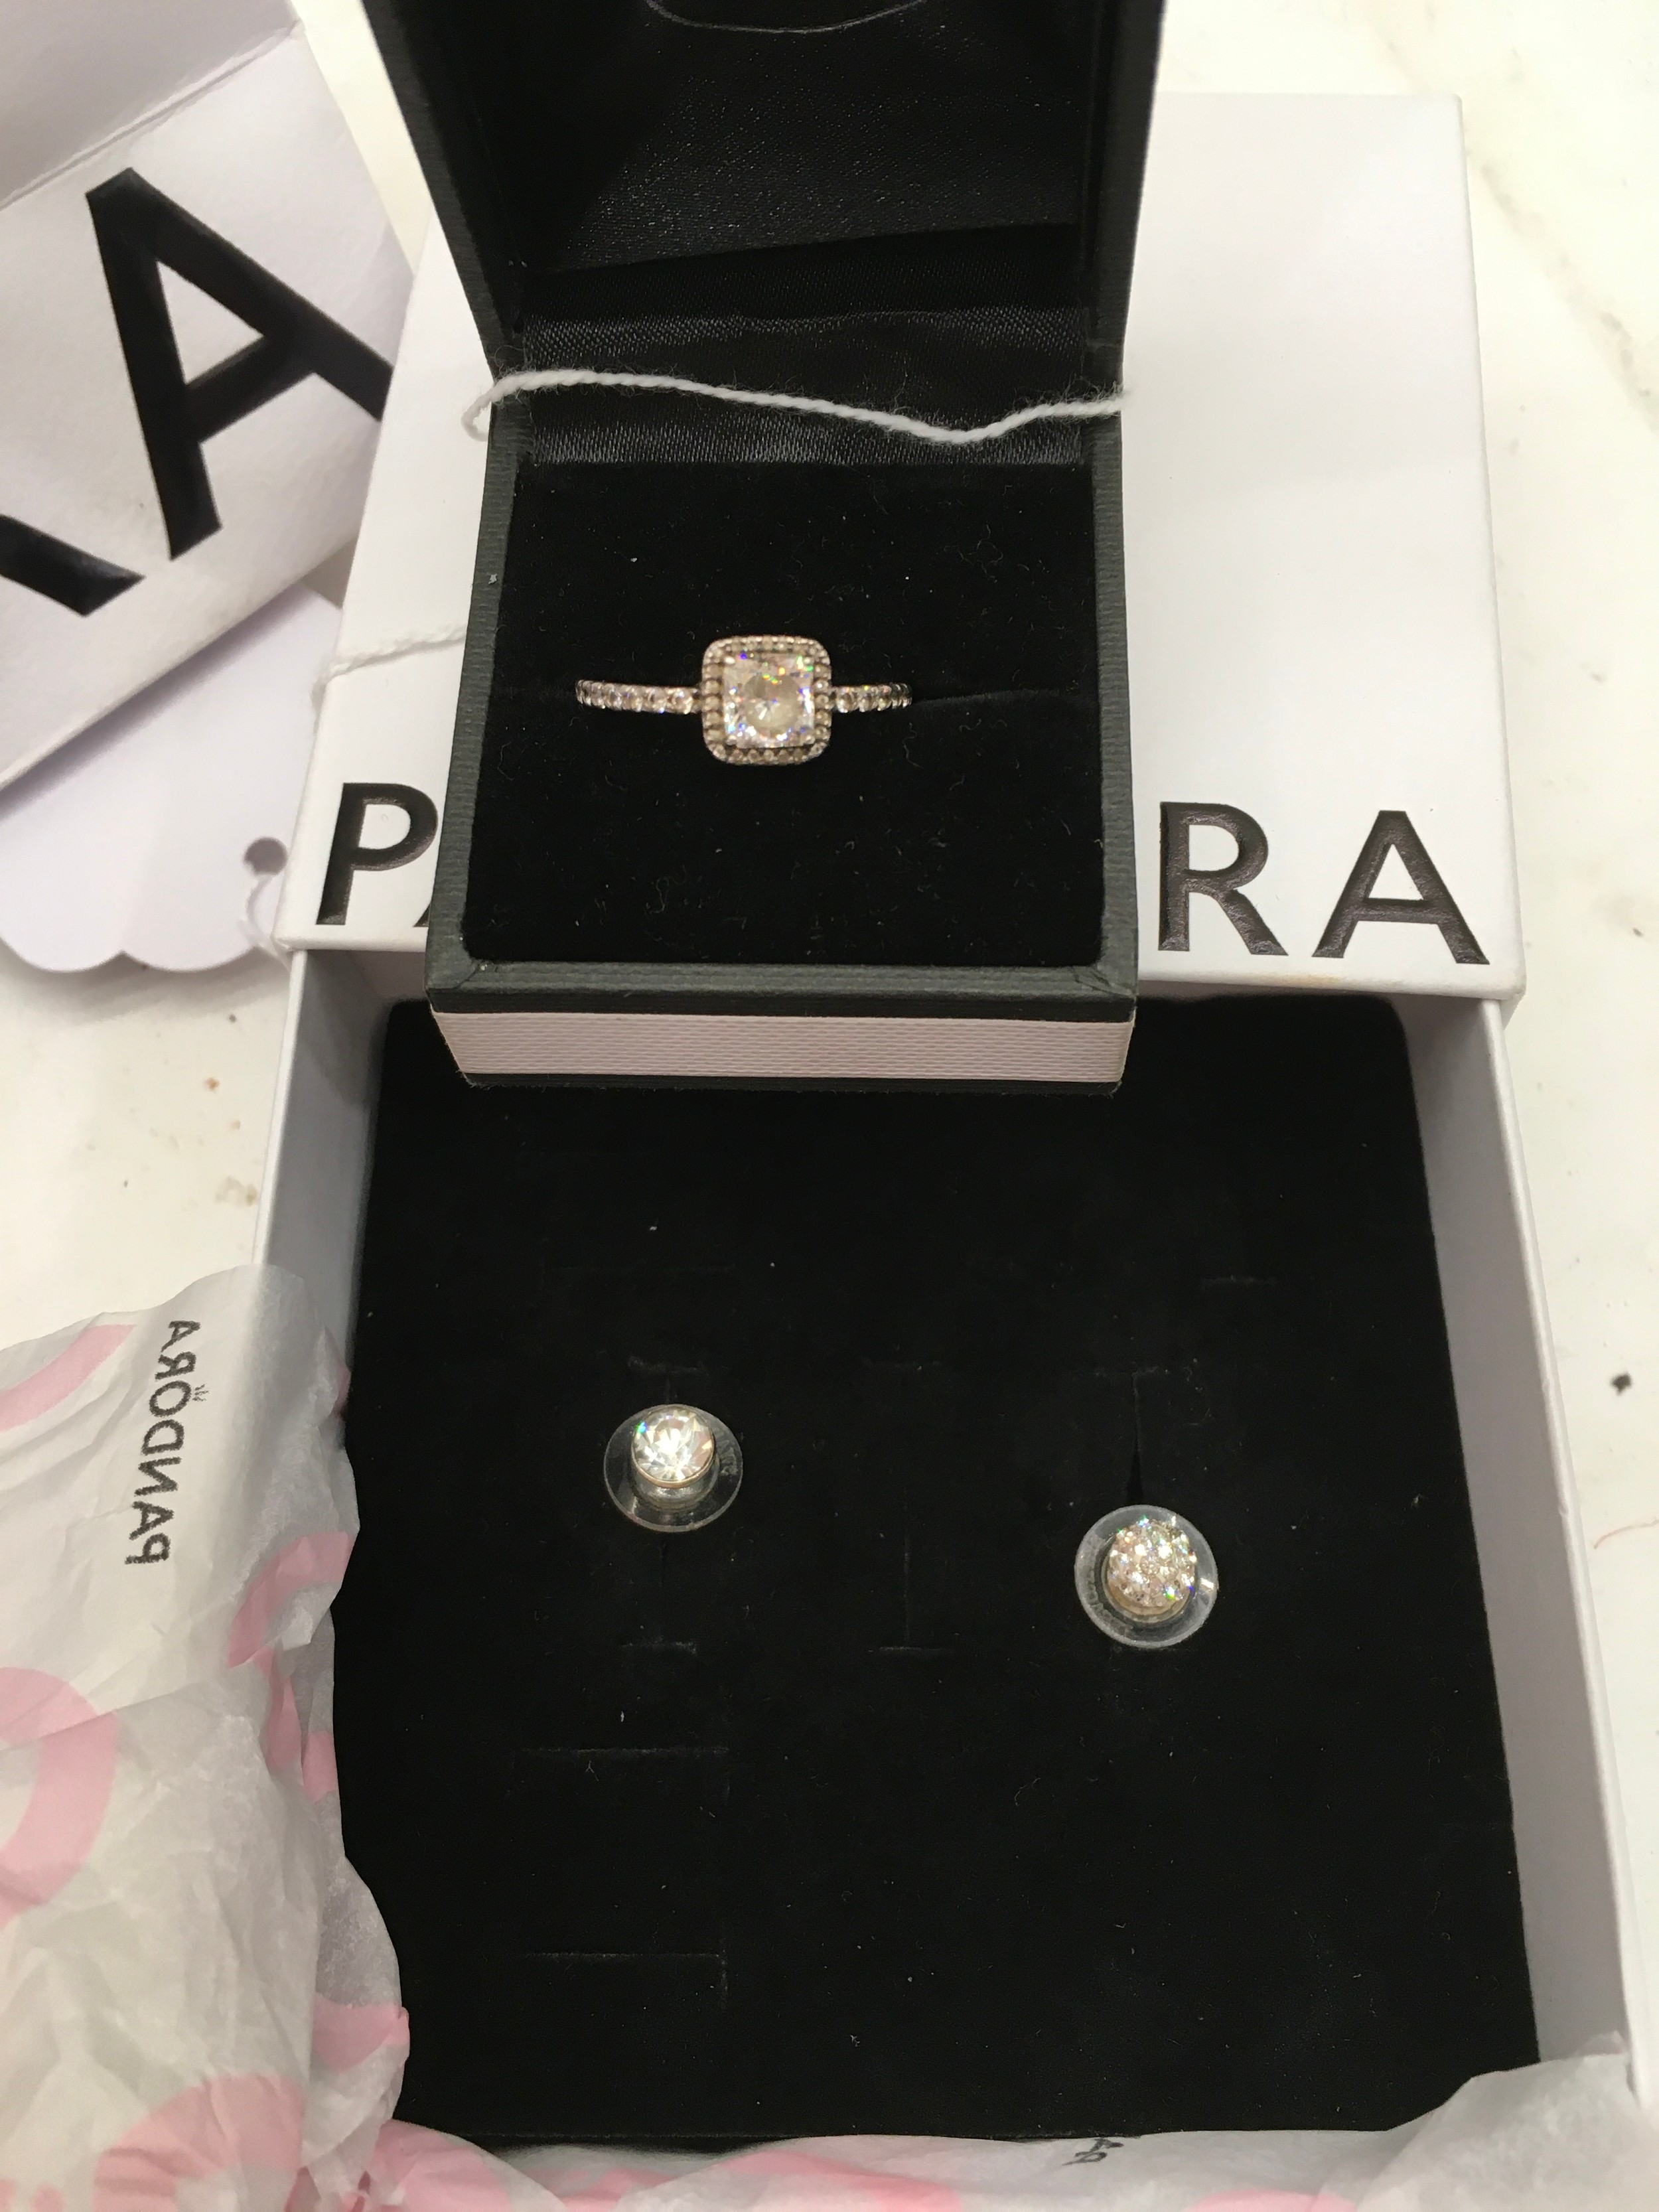 Pandora ALE 925 silver ring and two earrings (not Pandora) with boxes and bag ref 53, 186 - Image 2 of 2